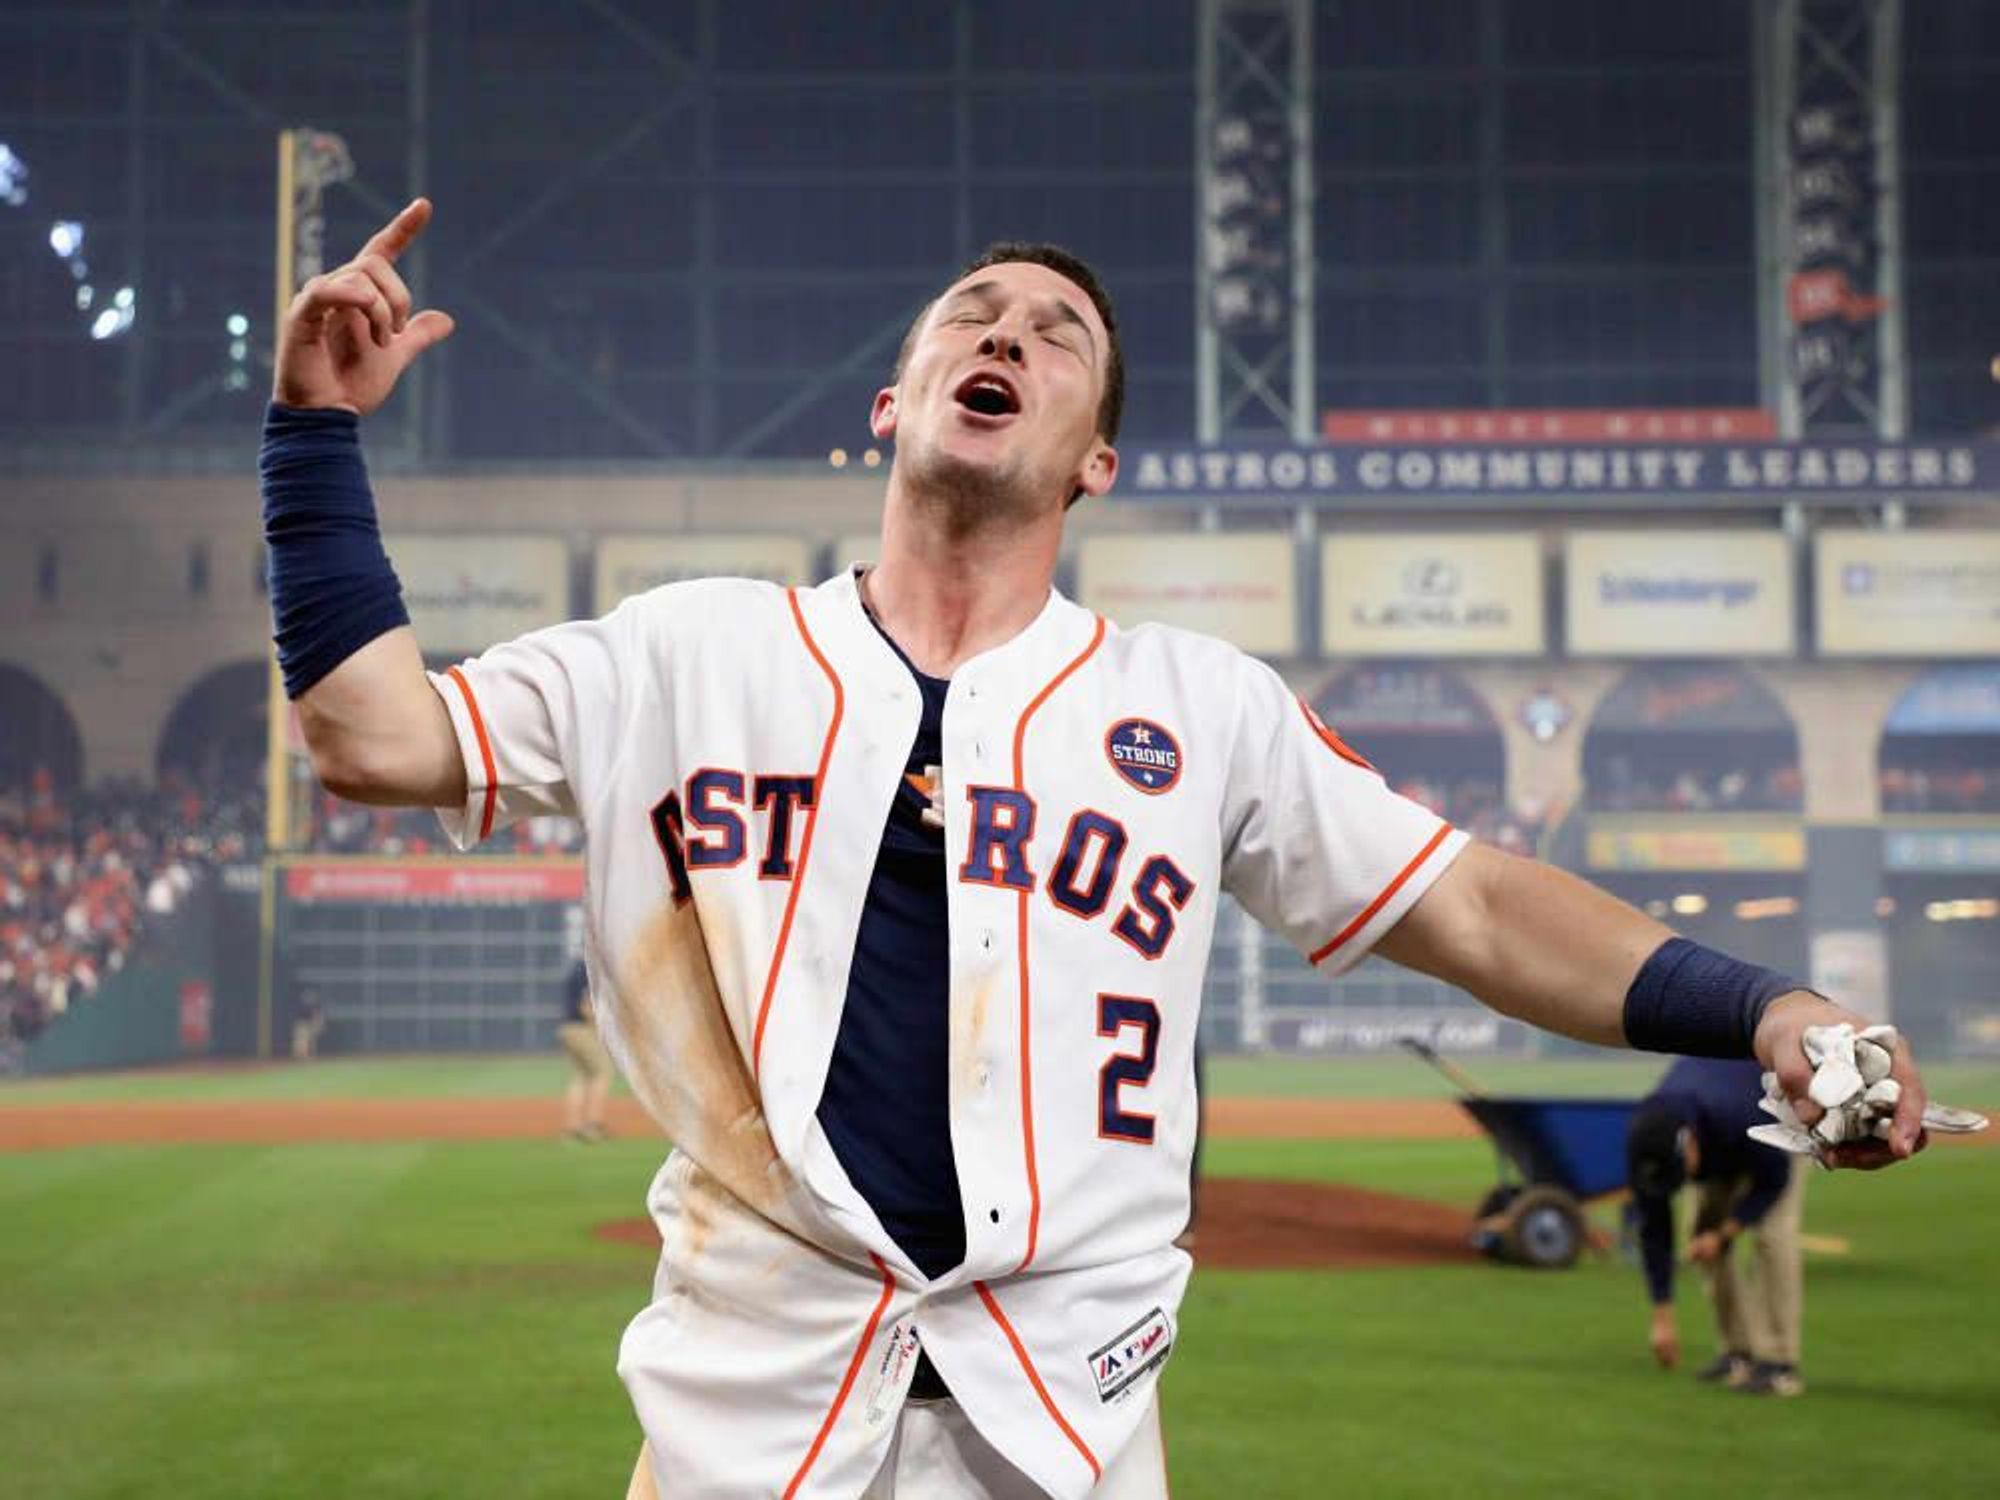 Astros Alex Bregman celebrates after hitting the game-winning single during the tenth inning to defeat the Los Angeles Dodgers in Game 5 of World Series